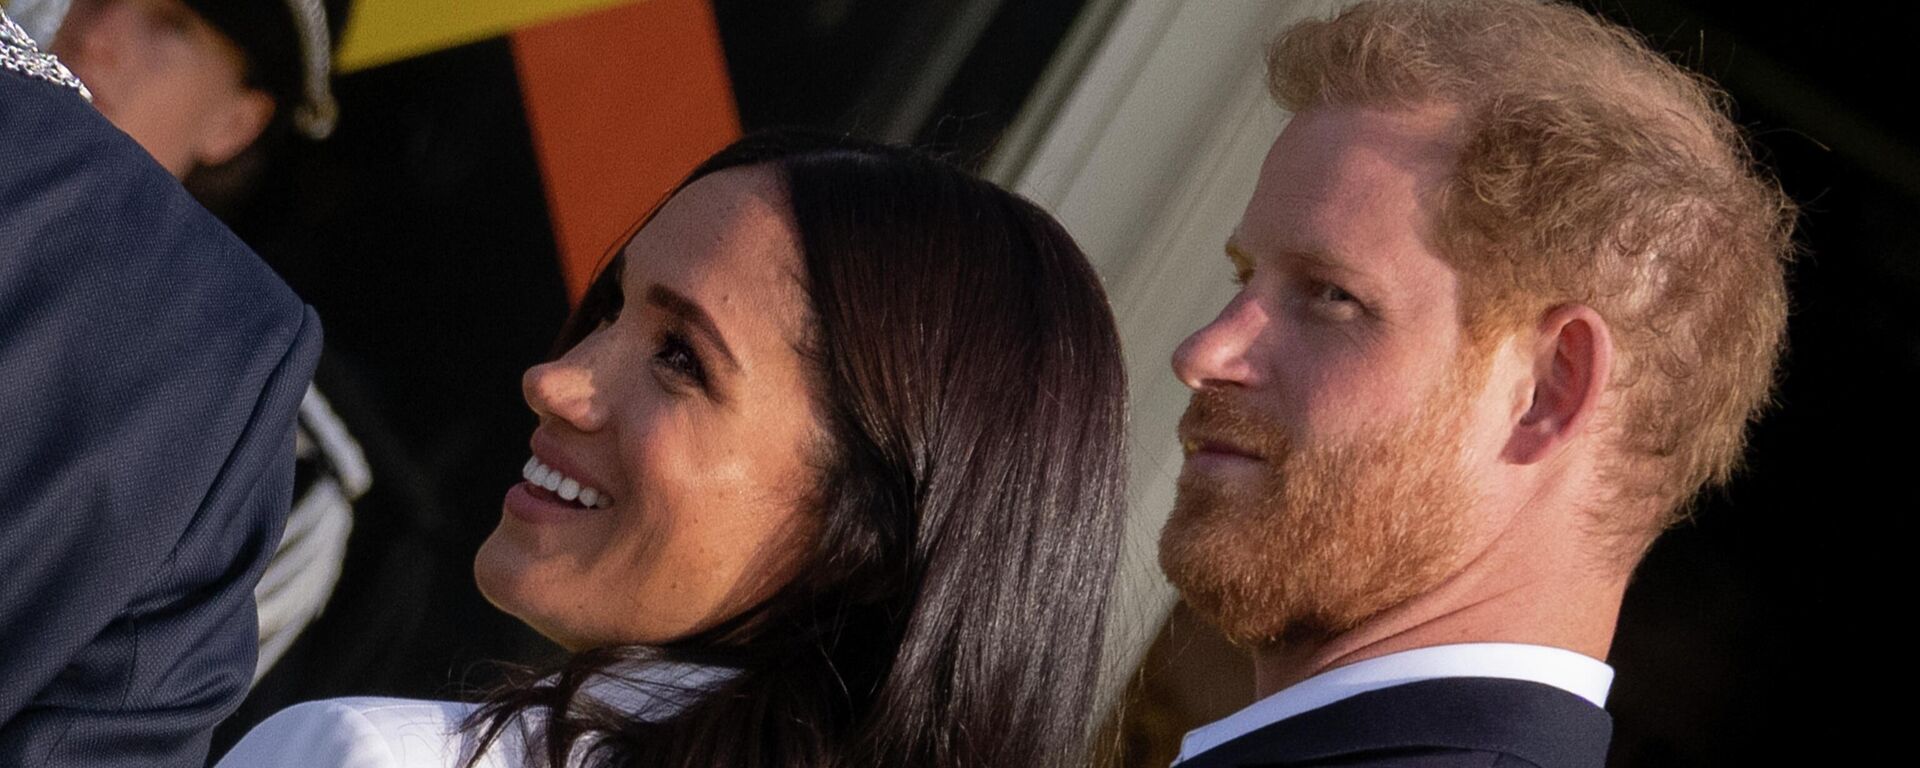 Prince Harry and Meghan Markle, Duke and Duchess of Sussex, arrive at the Invictus Games venue in The Hague, Netherlands, Friday, April 15, 2022.  - Sputnik International, 1920, 16.04.2022